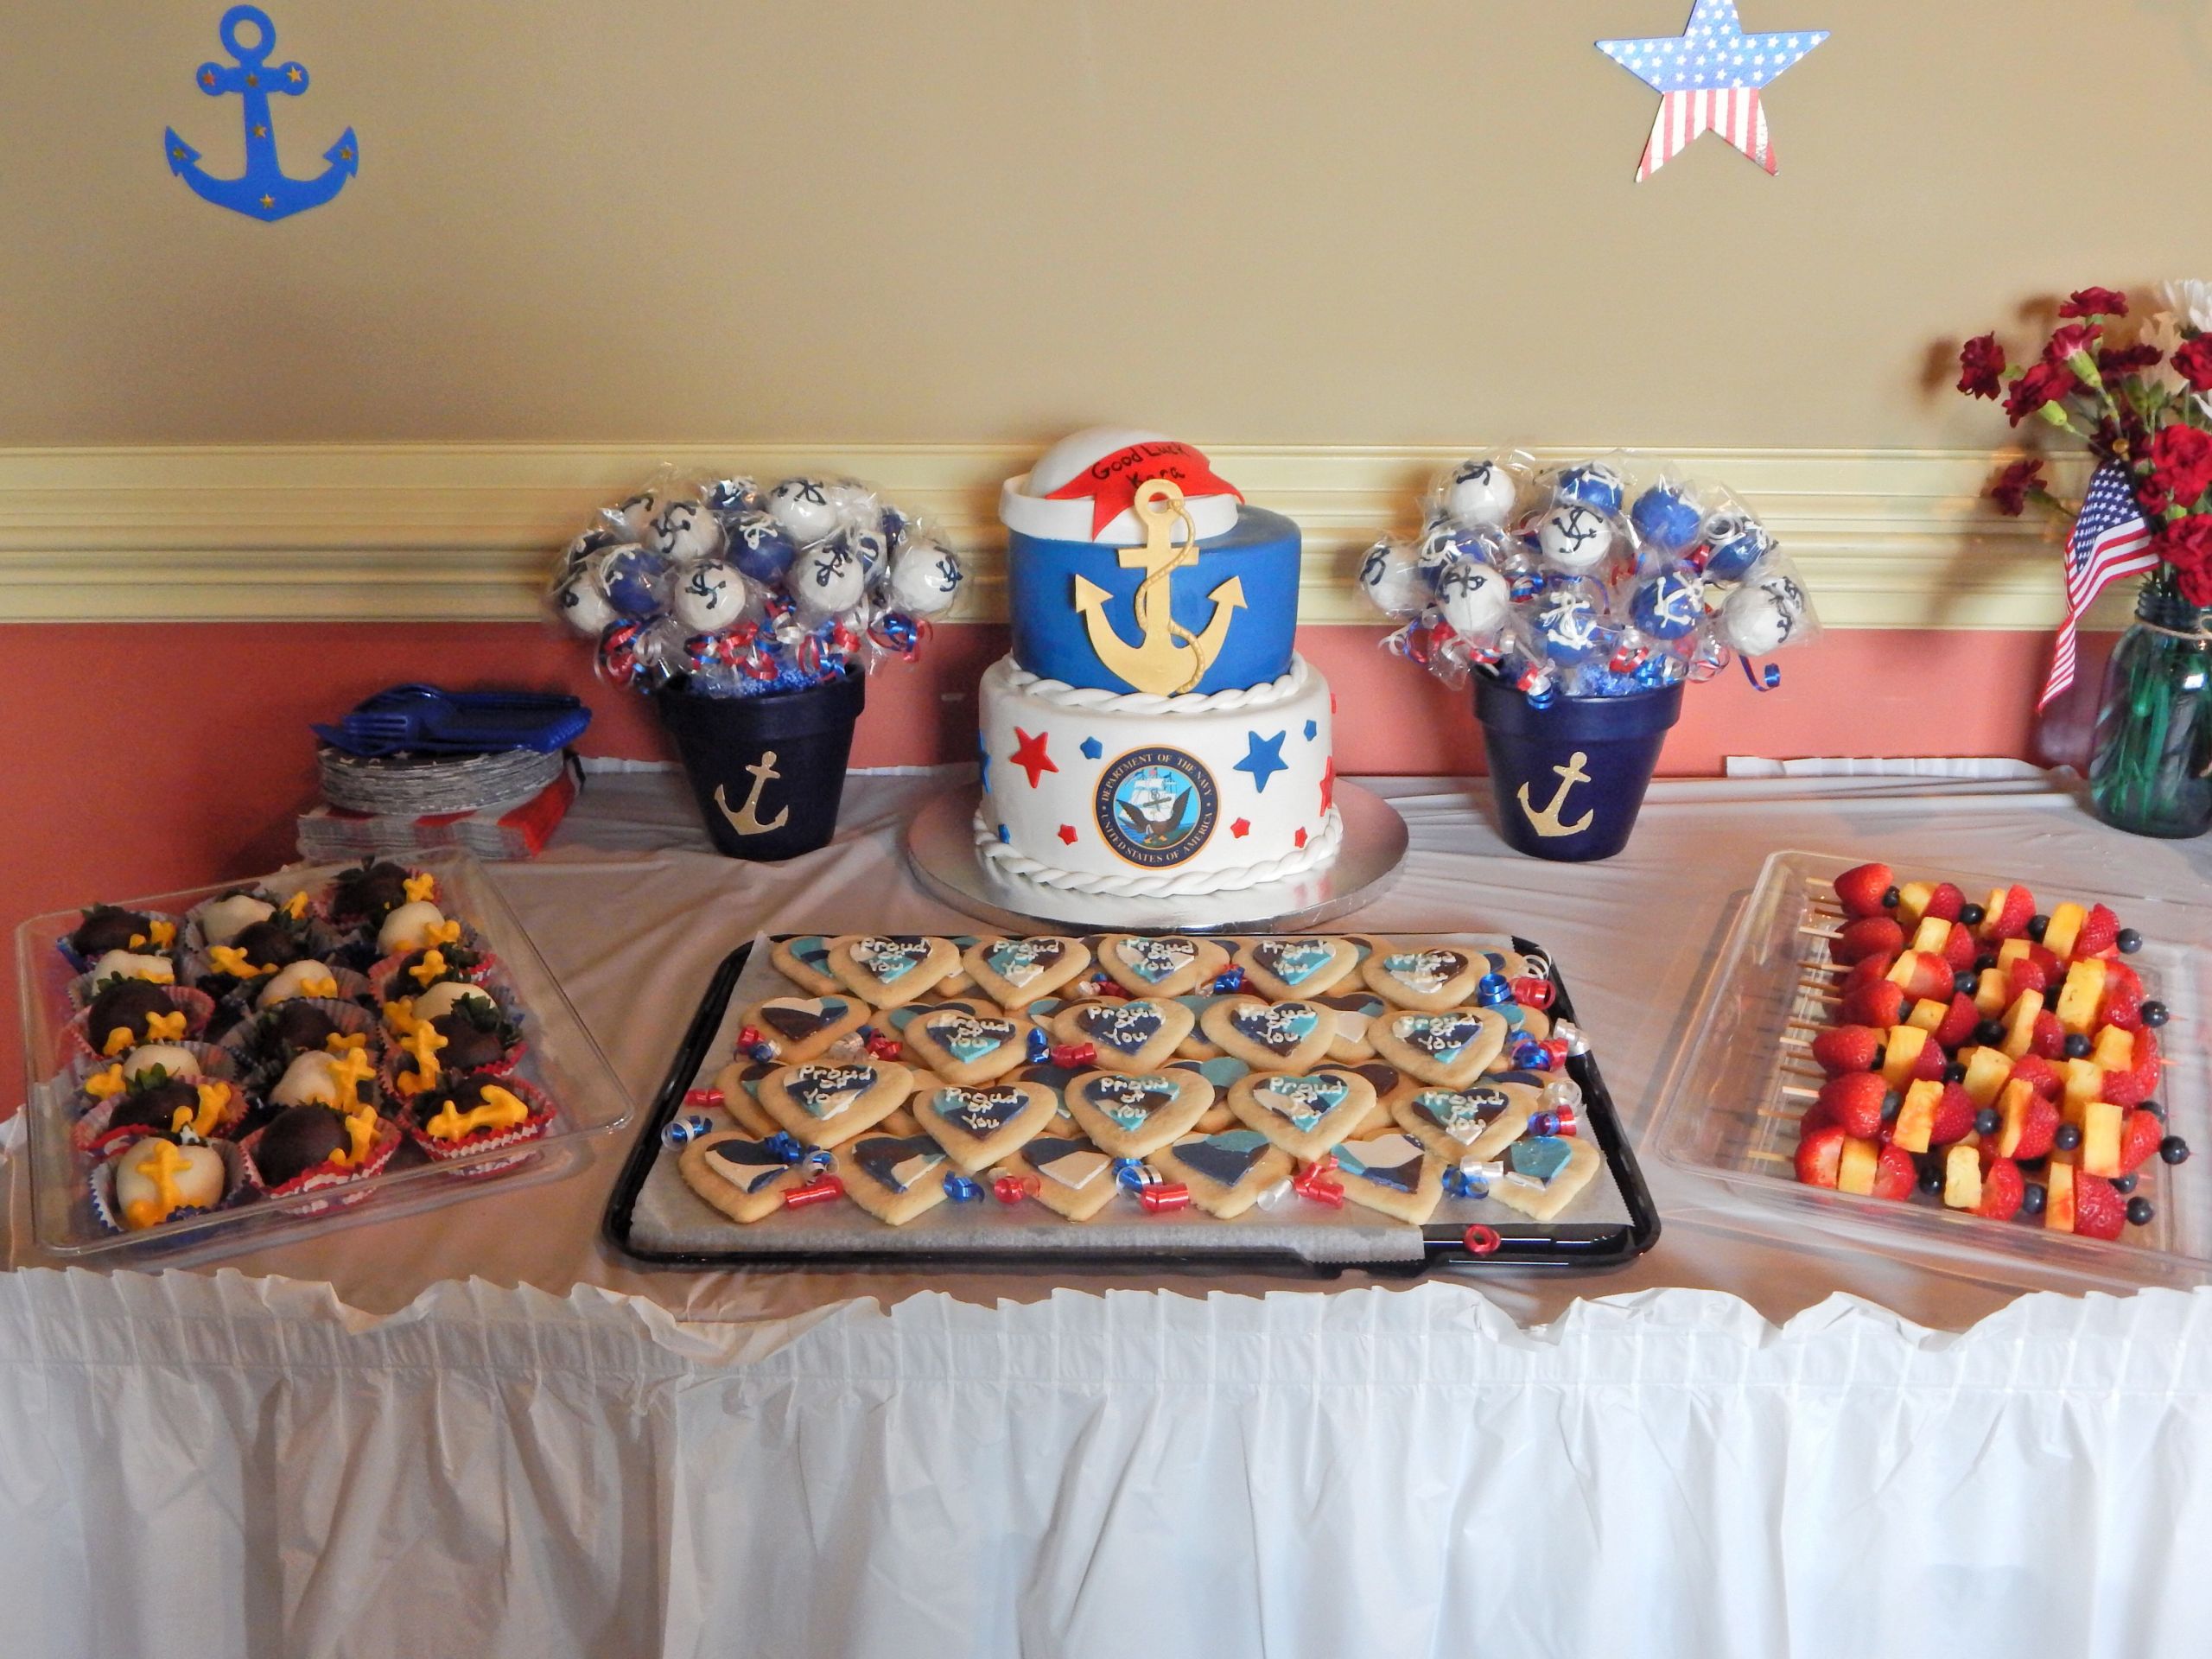 Gift Ideas For Navy Boot Camp Graduation
 Desserts Navy Boot Camp Going Away Party Navy BootCamp